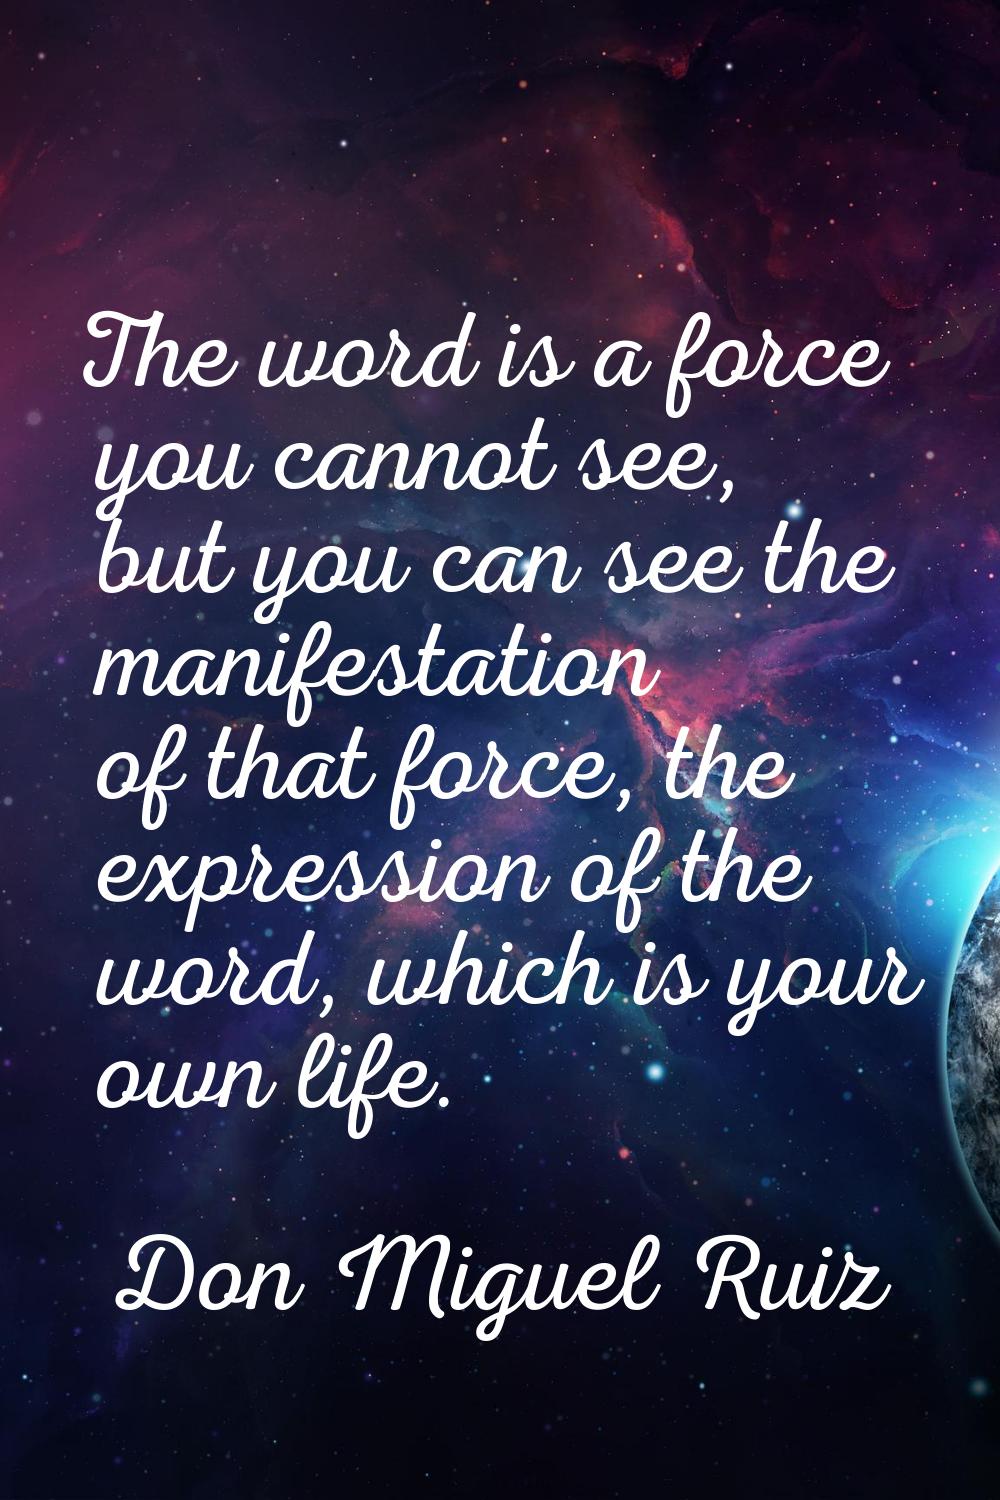 The word is a force you cannot see, but you can see the manifestation of that force, the expression